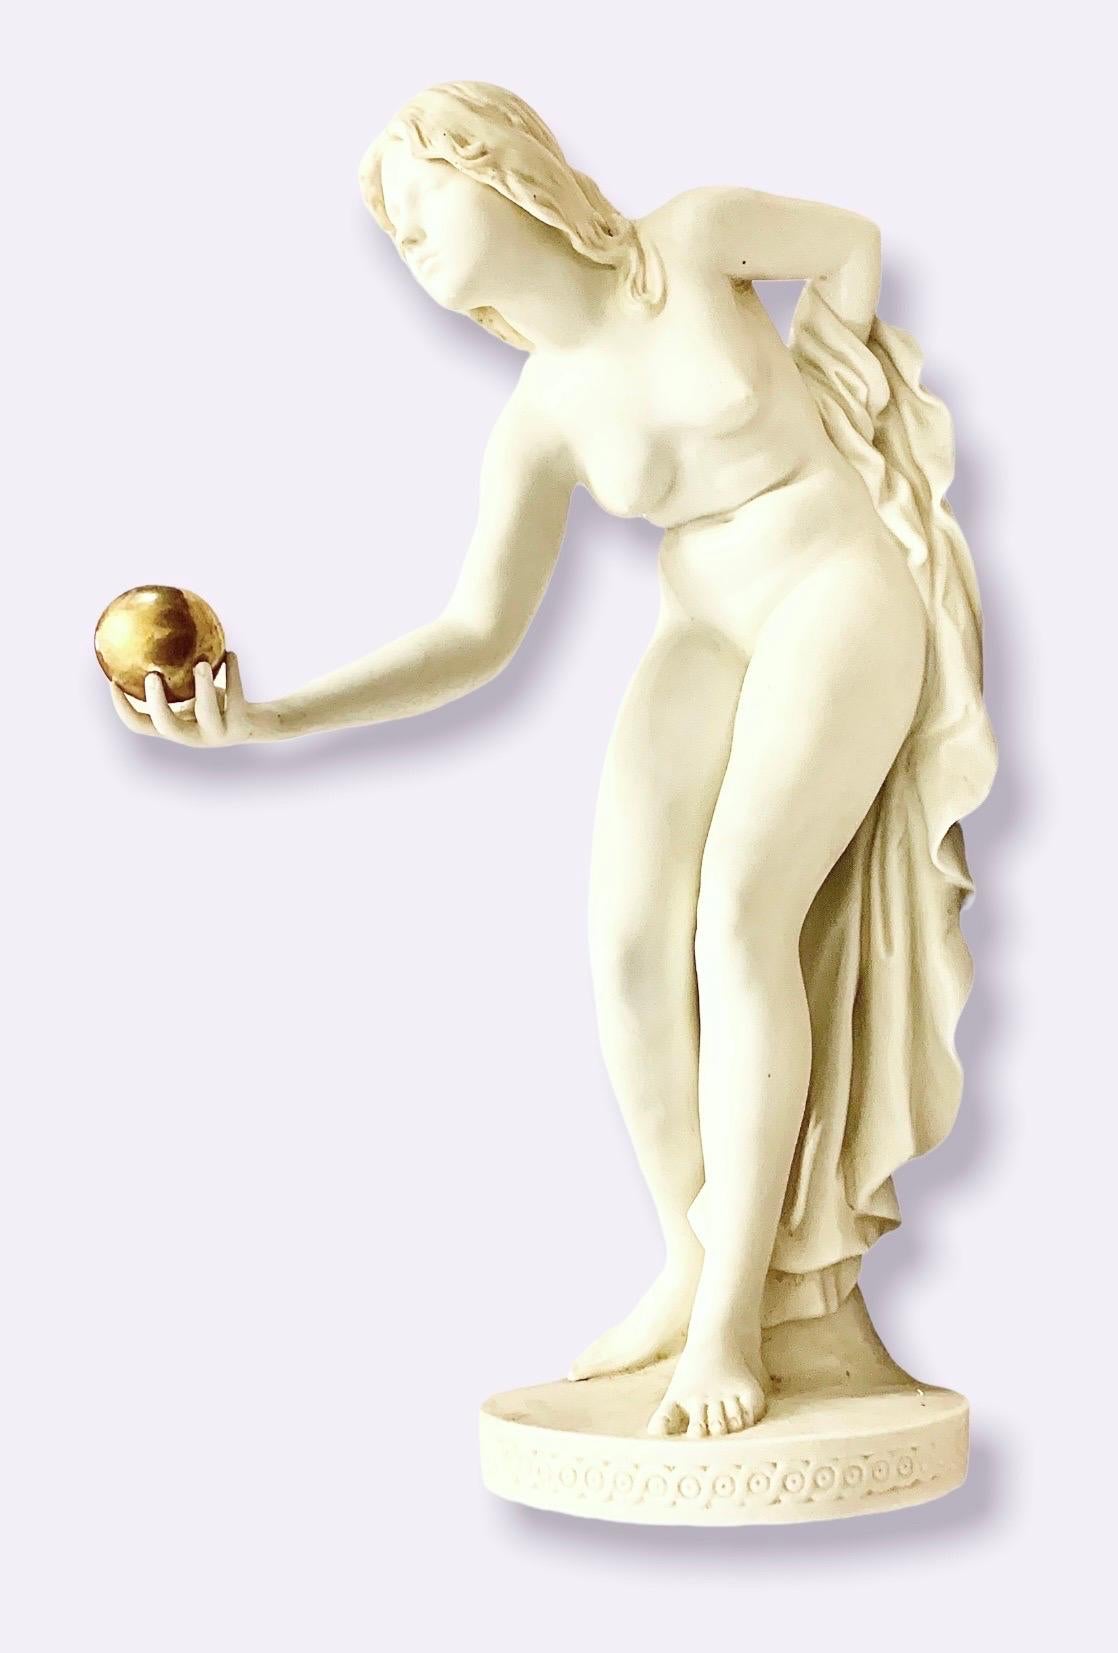 A fine, antique early 20th century Parian polychromed figure of a nude blond woman holding a gilt ball in her right hand. Fine attention to detail is seen in her delicately rendered fingers, feet and face. 
Parian is a fine unglazed biscuit